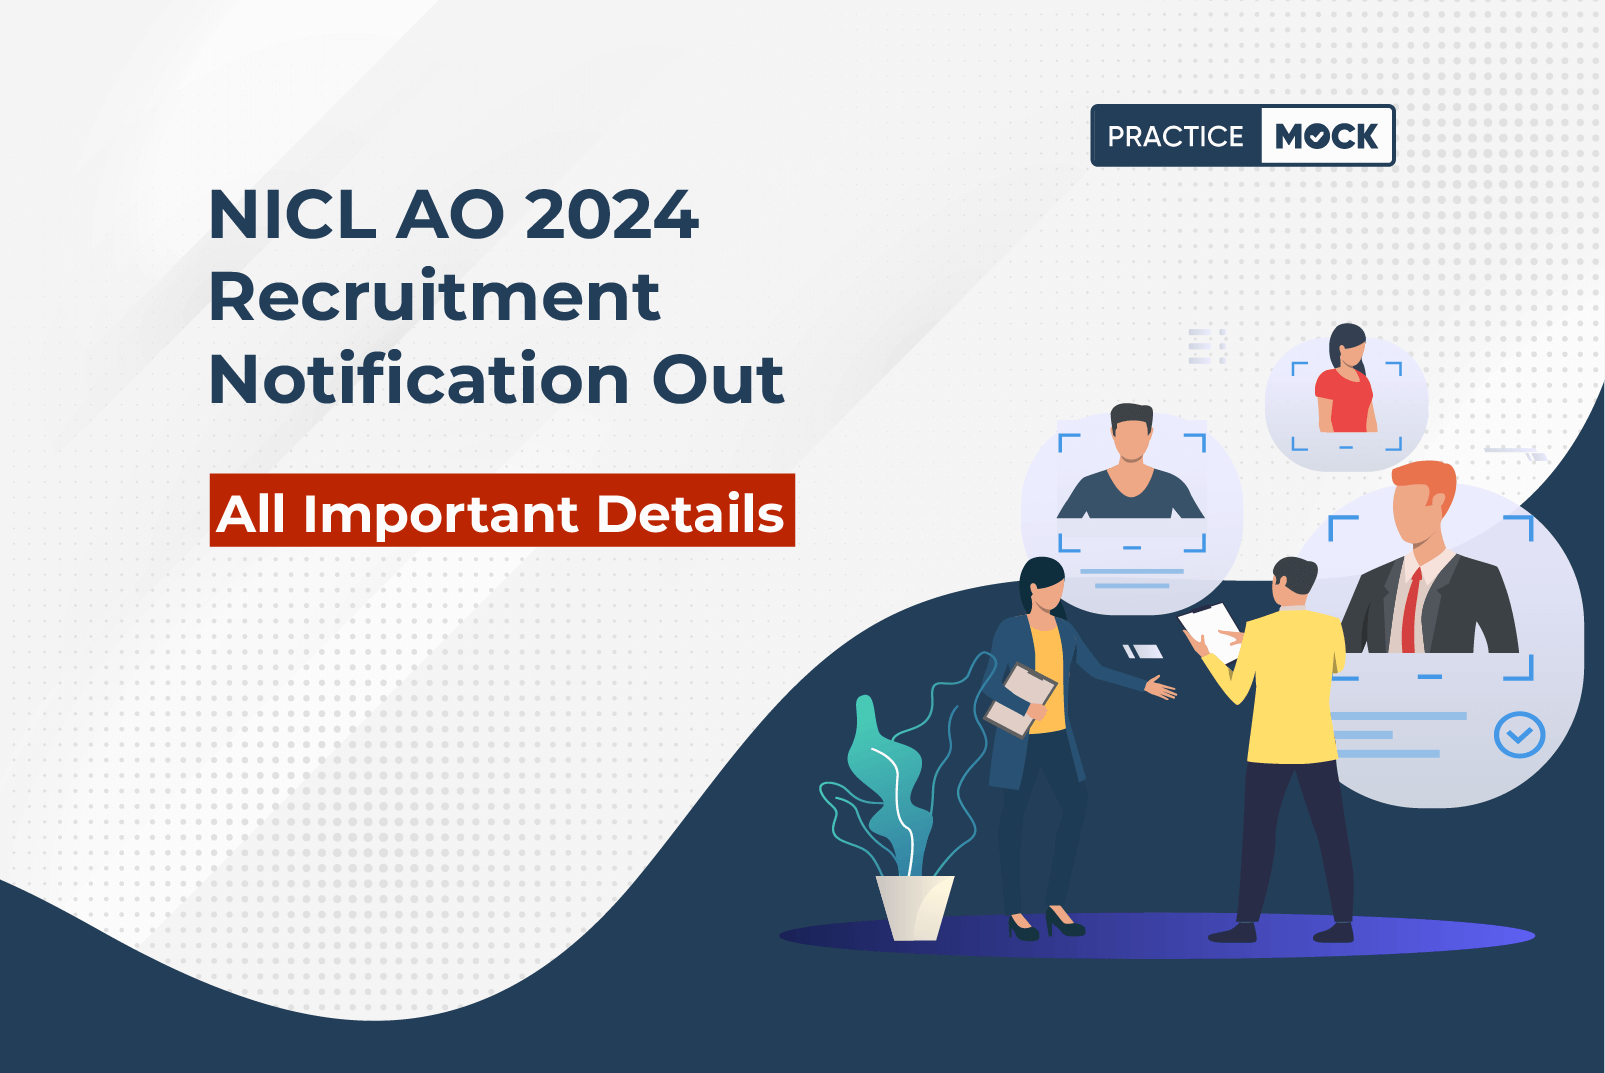 NICL AO 2024 Recruitment Notification Out